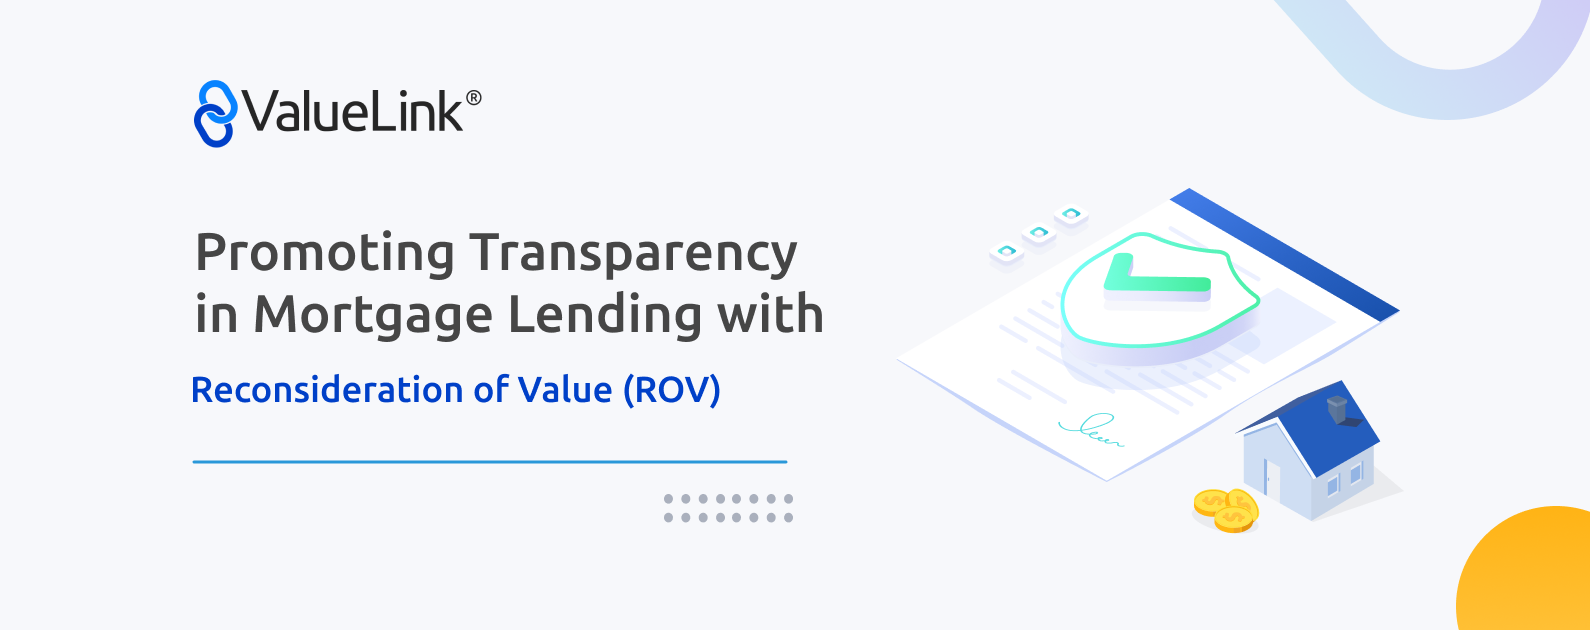 Promoting Transparency in Mortgage Lending with Reconsideration of Value (ROV)